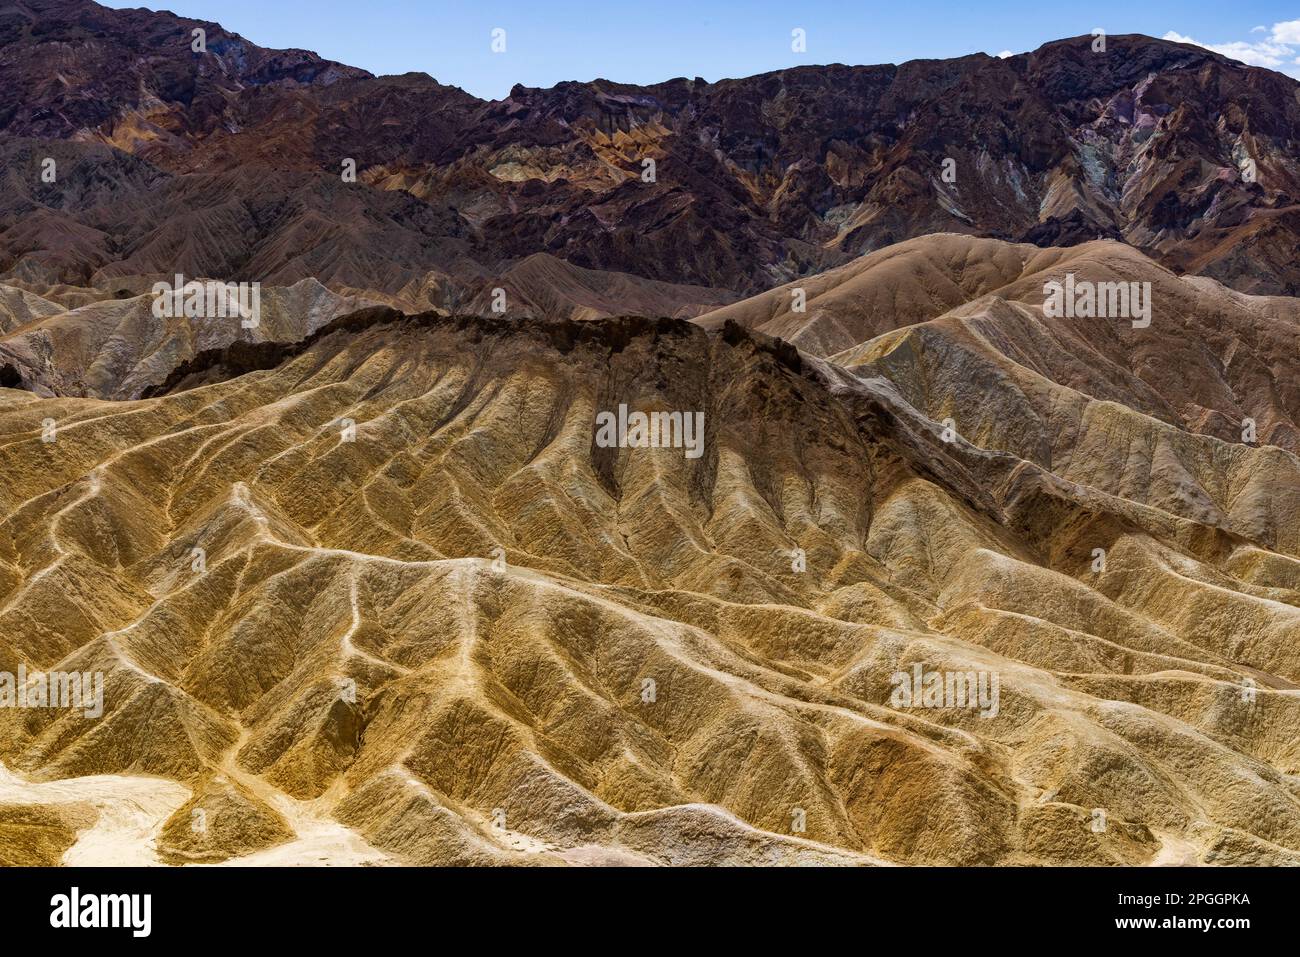 This is a view of the multi-colored 'badlands' looking south from  Zabriskie Point overlook in Death Valley National Park, California, USA. Stock Photo